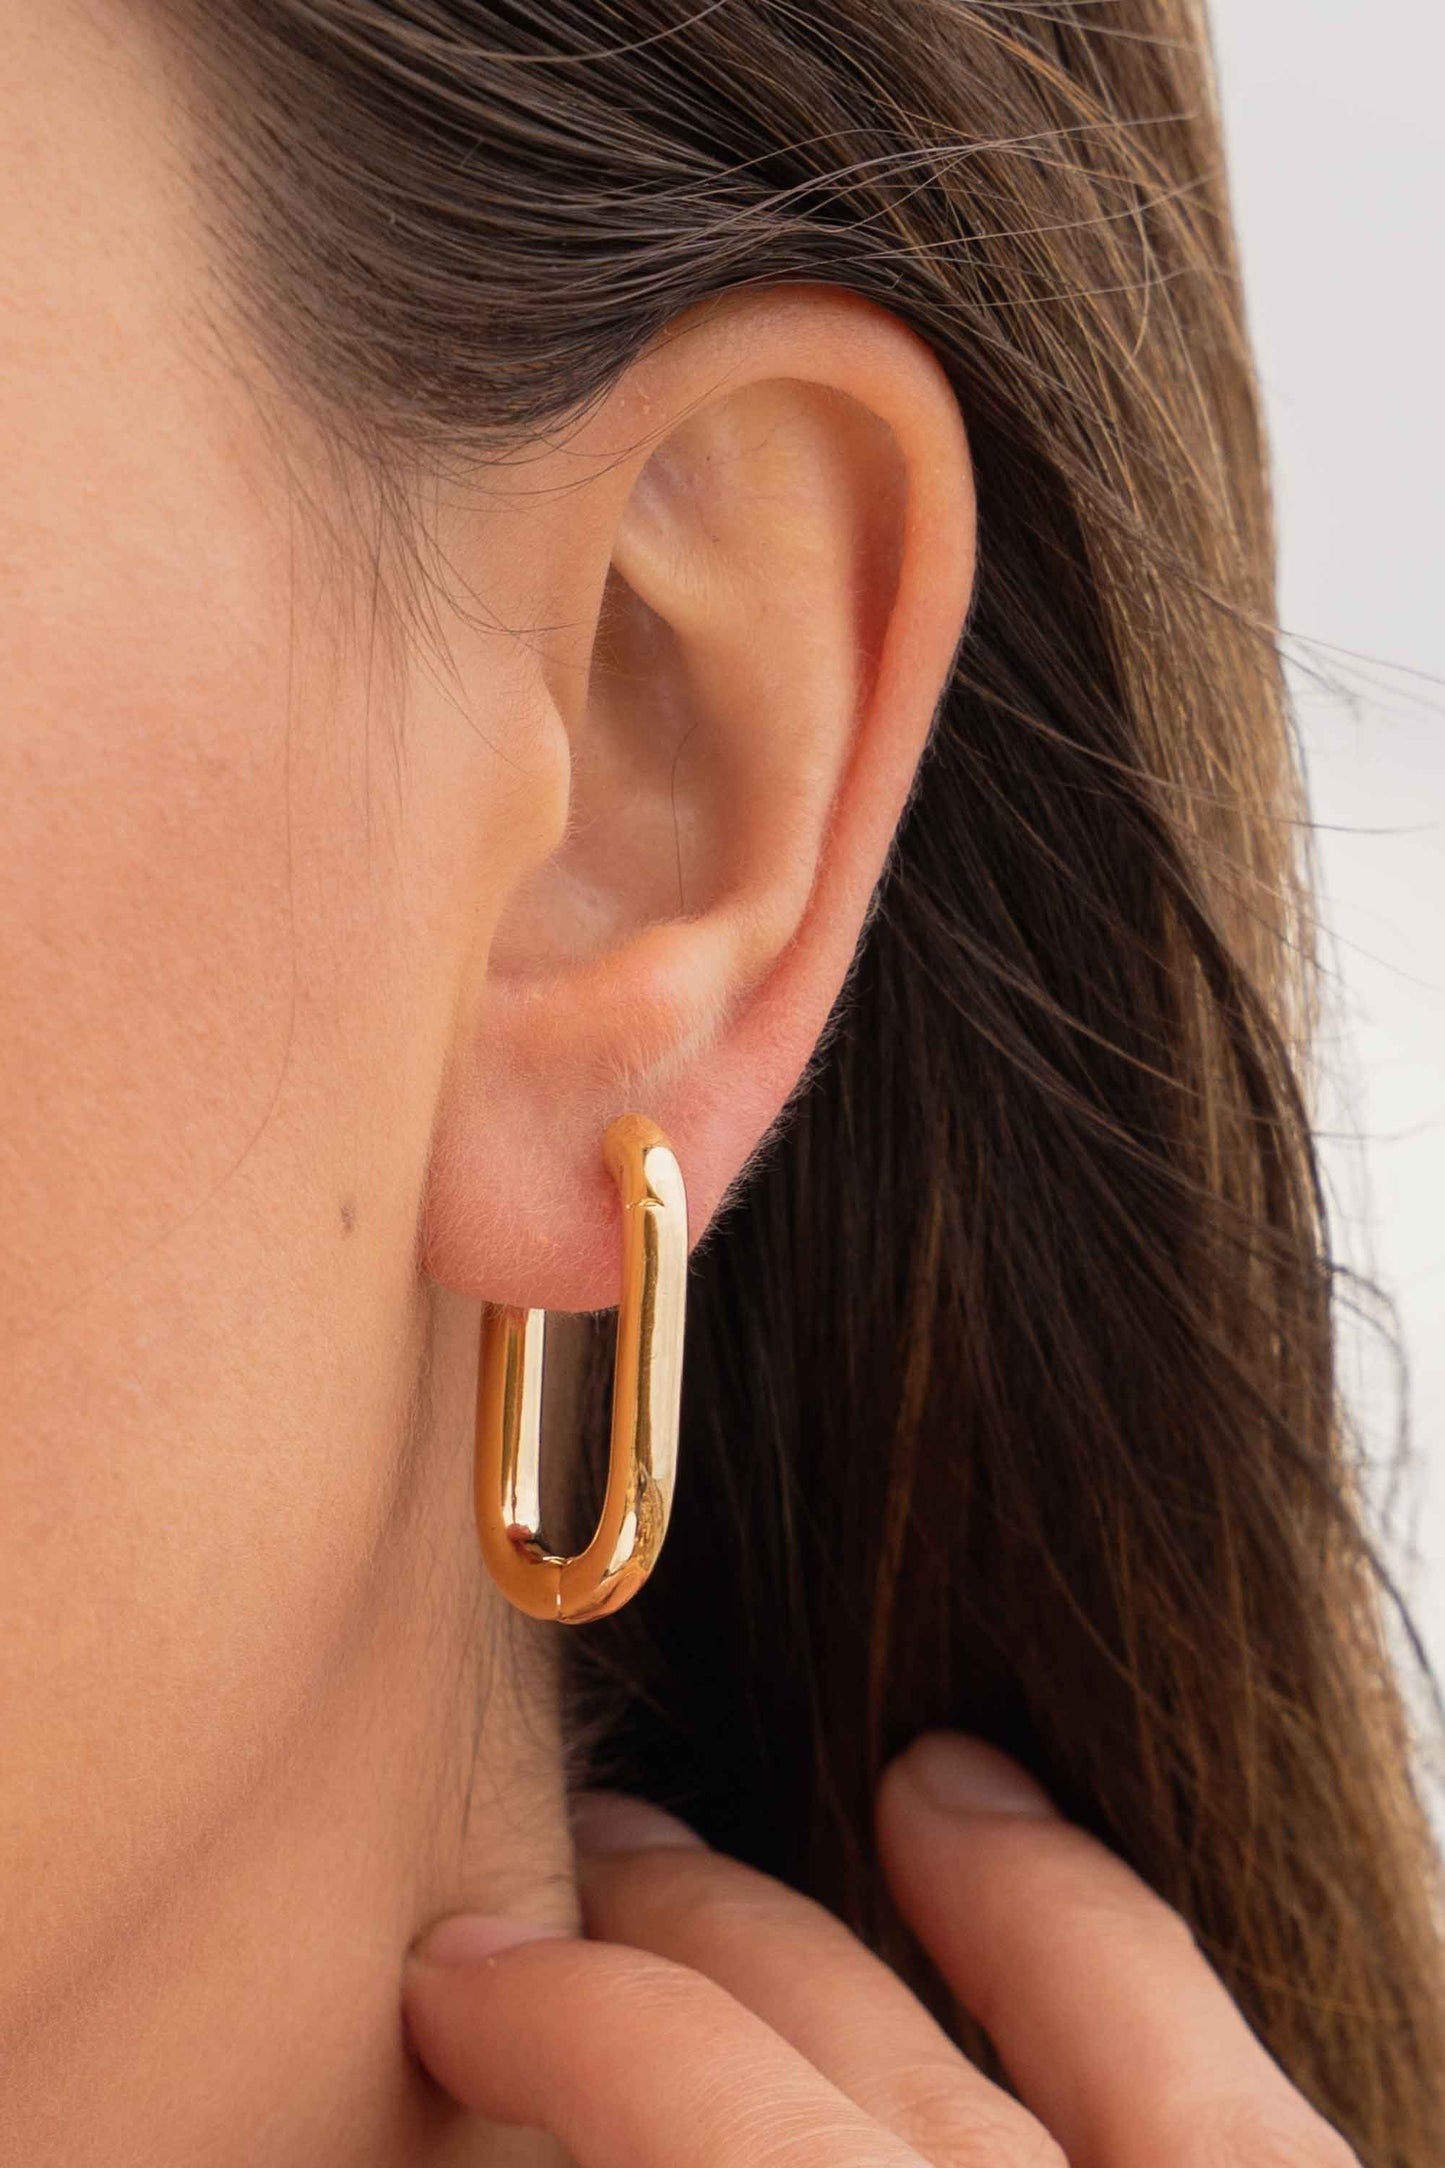 chunky-oval-geometric-chubby-statement-gold-hoop-earrings-on-body-close